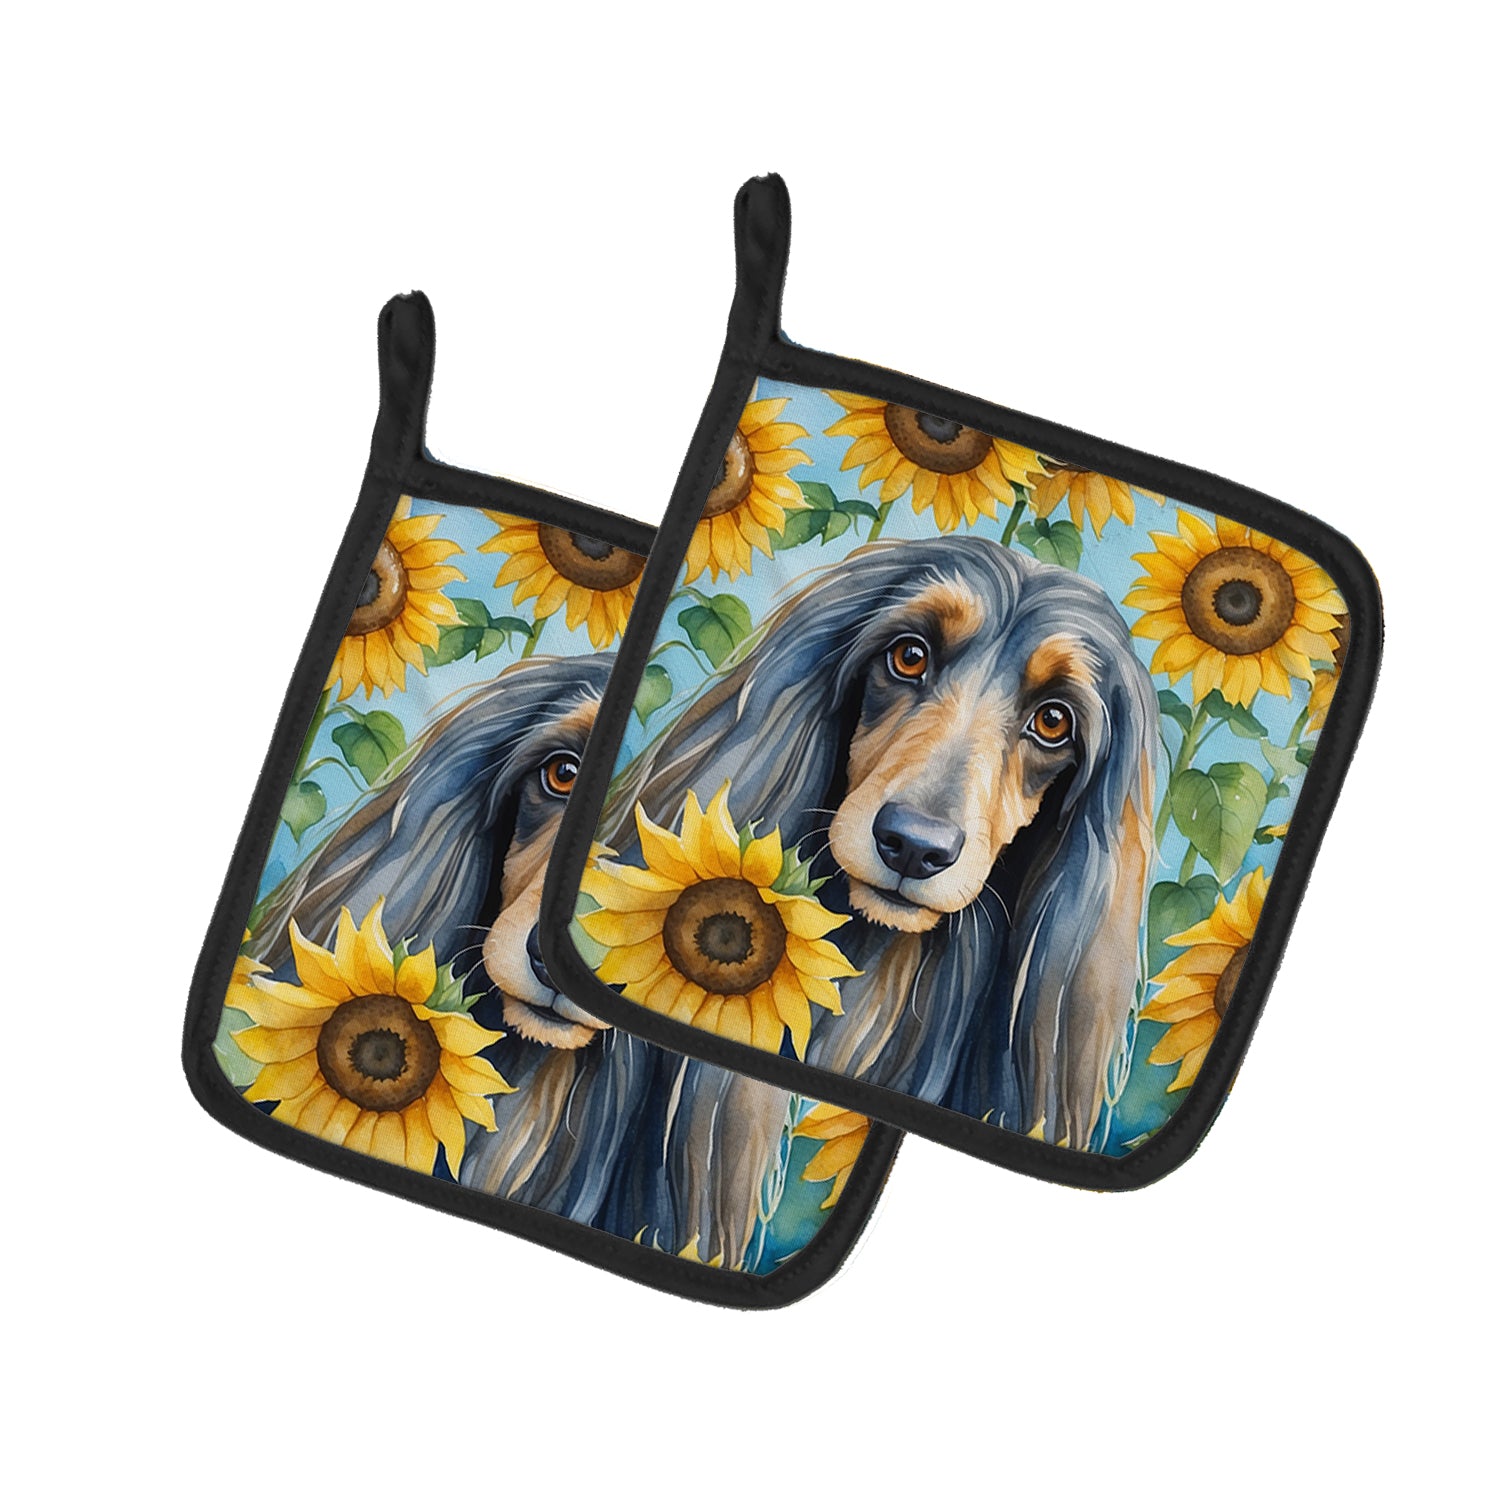 Buy this Afghan Hound in Sunflowers Pair of Pot Holders